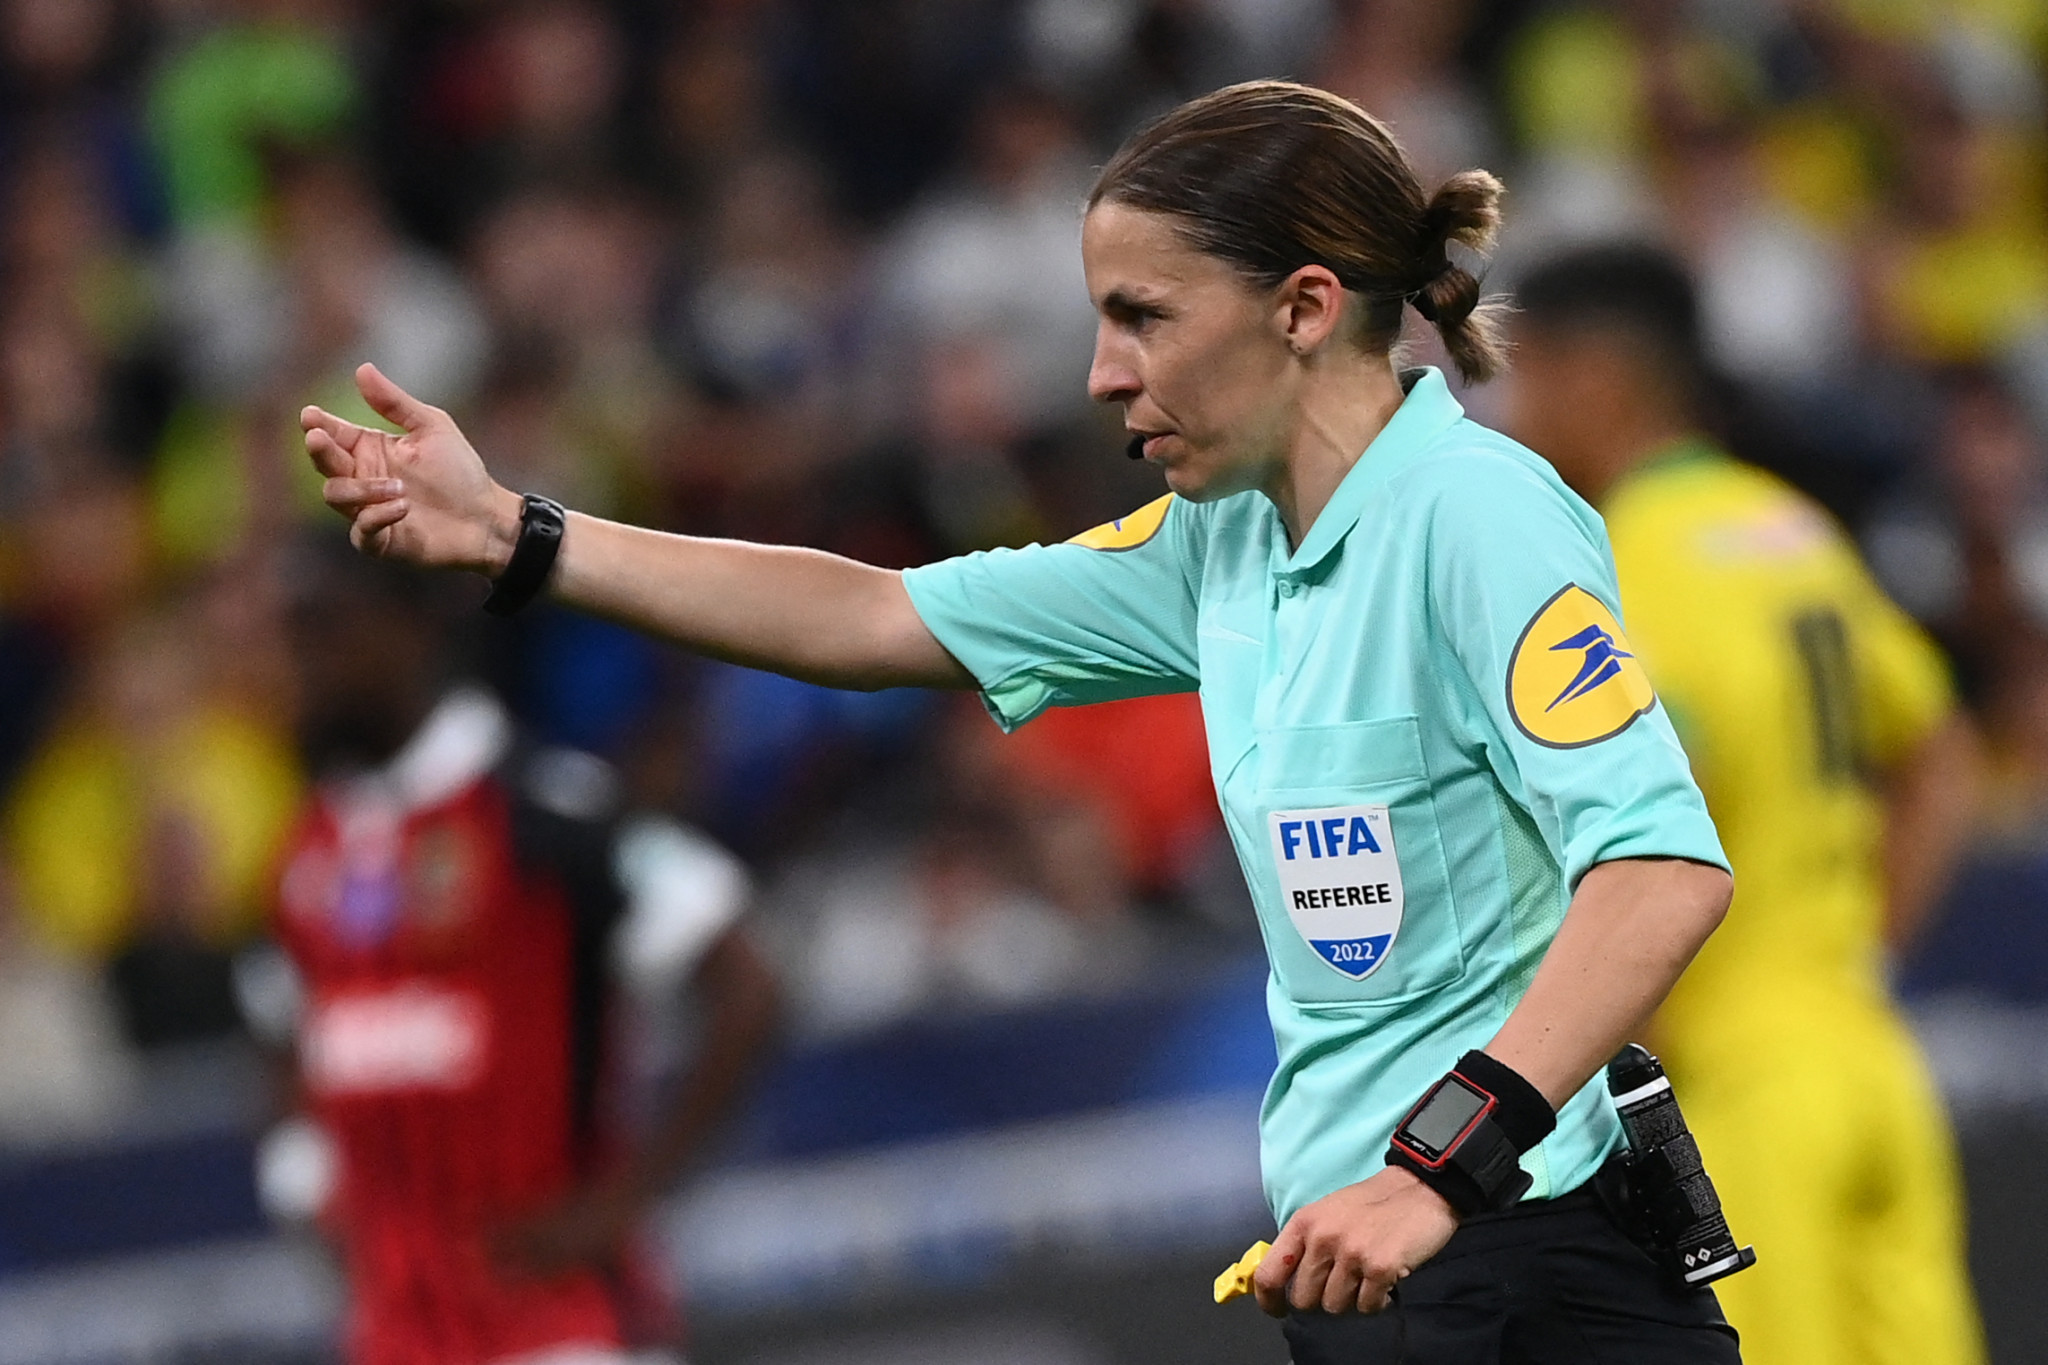 Three women referees and Zambian who ended AFCON game early chosen for FIFA World Cup in Qatar